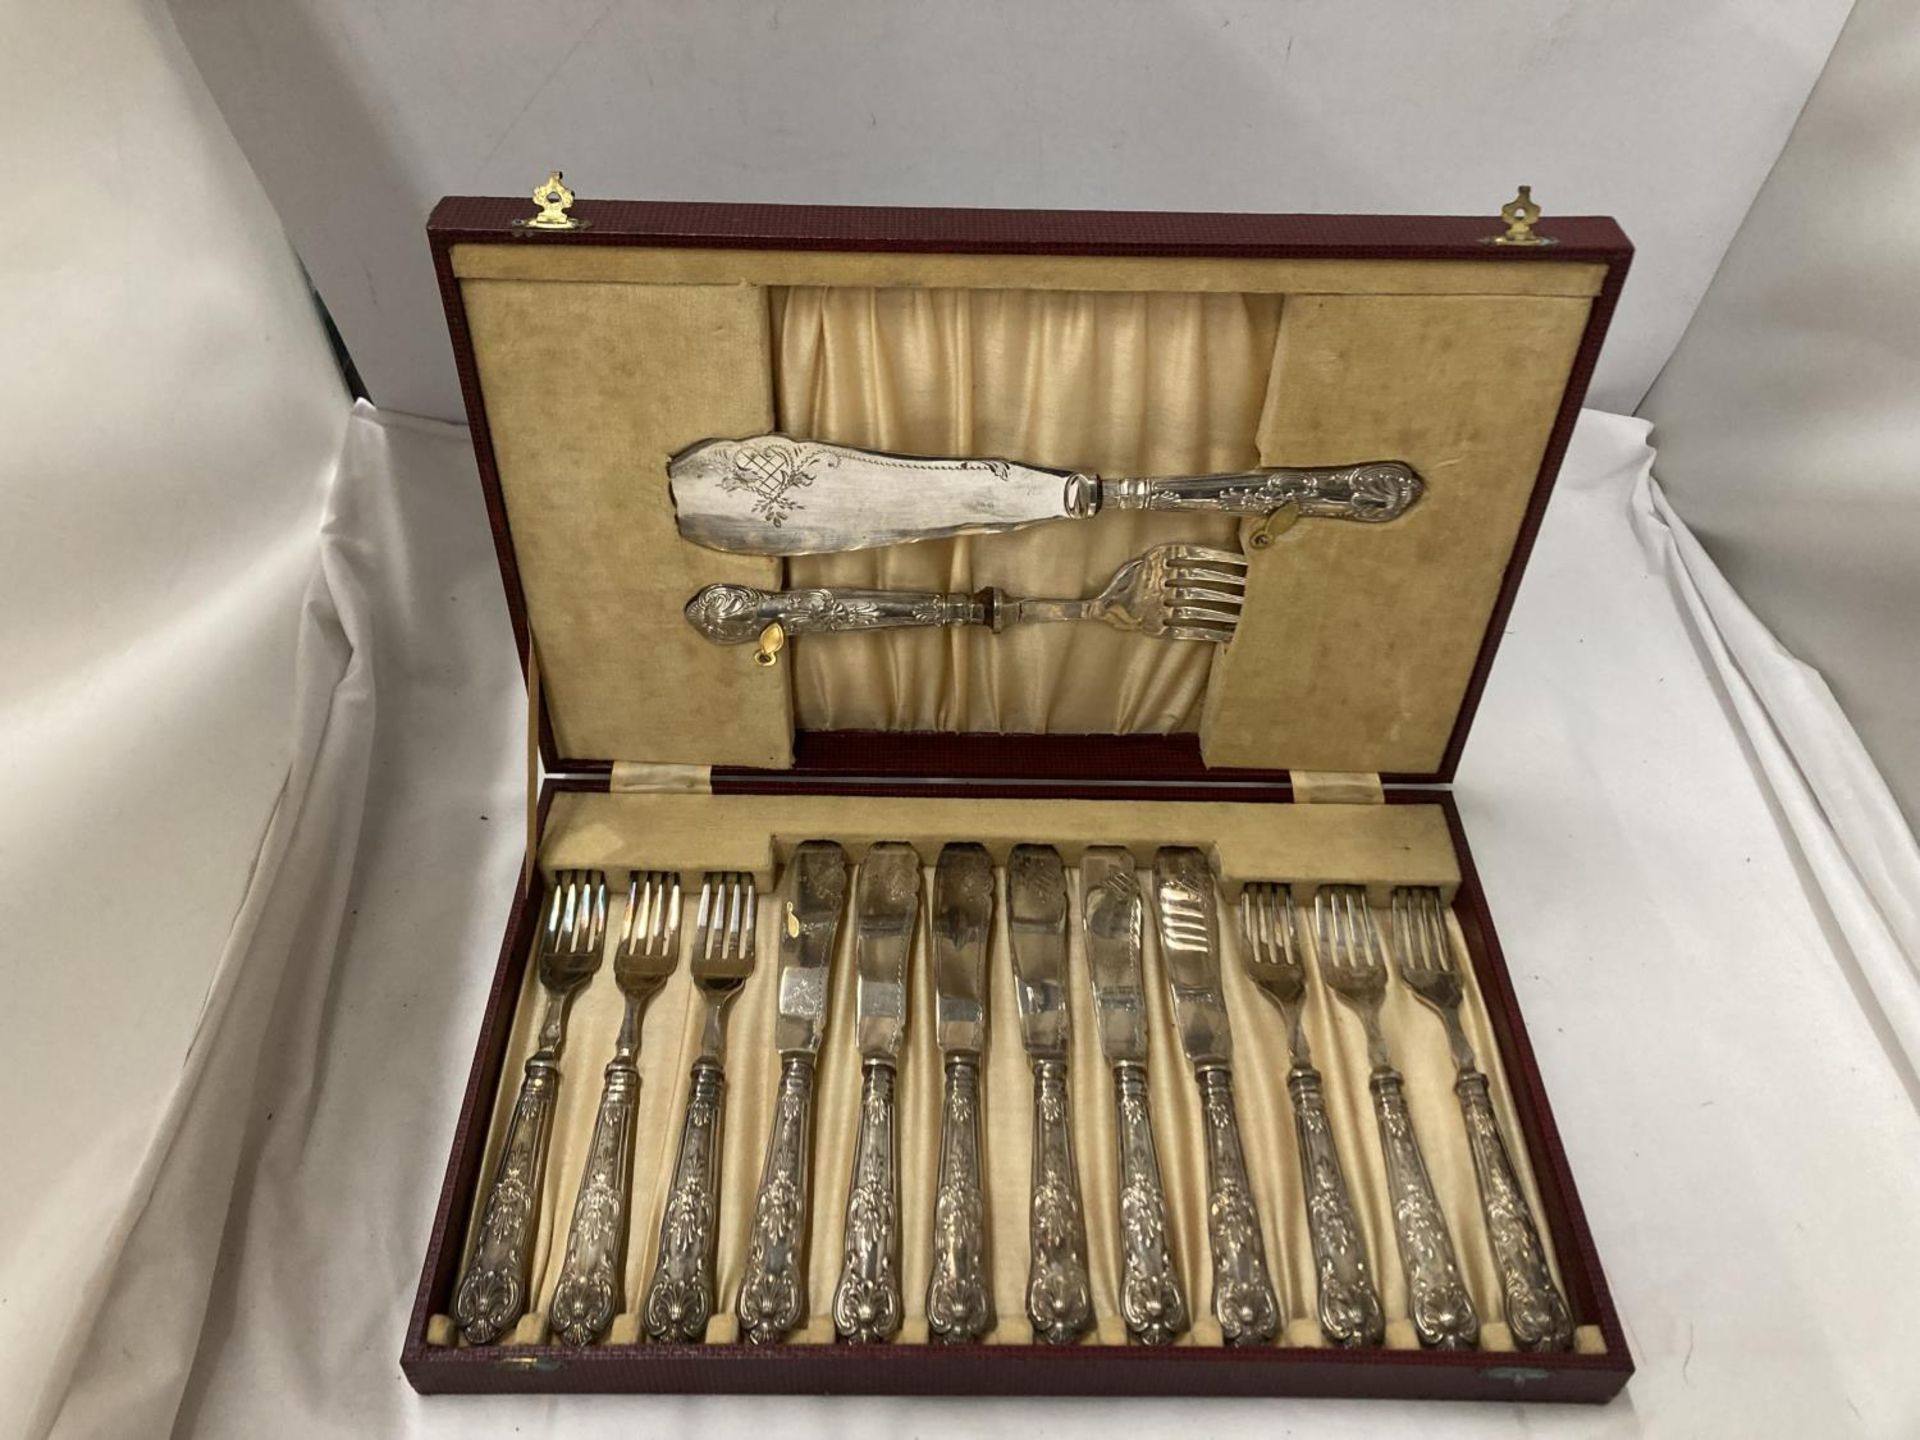 A HALLMARKED SHEFFIELD FISH CUTLERY SET TO INCLUDE KNIVES, FORKS AND SERVING SET IN A CASE